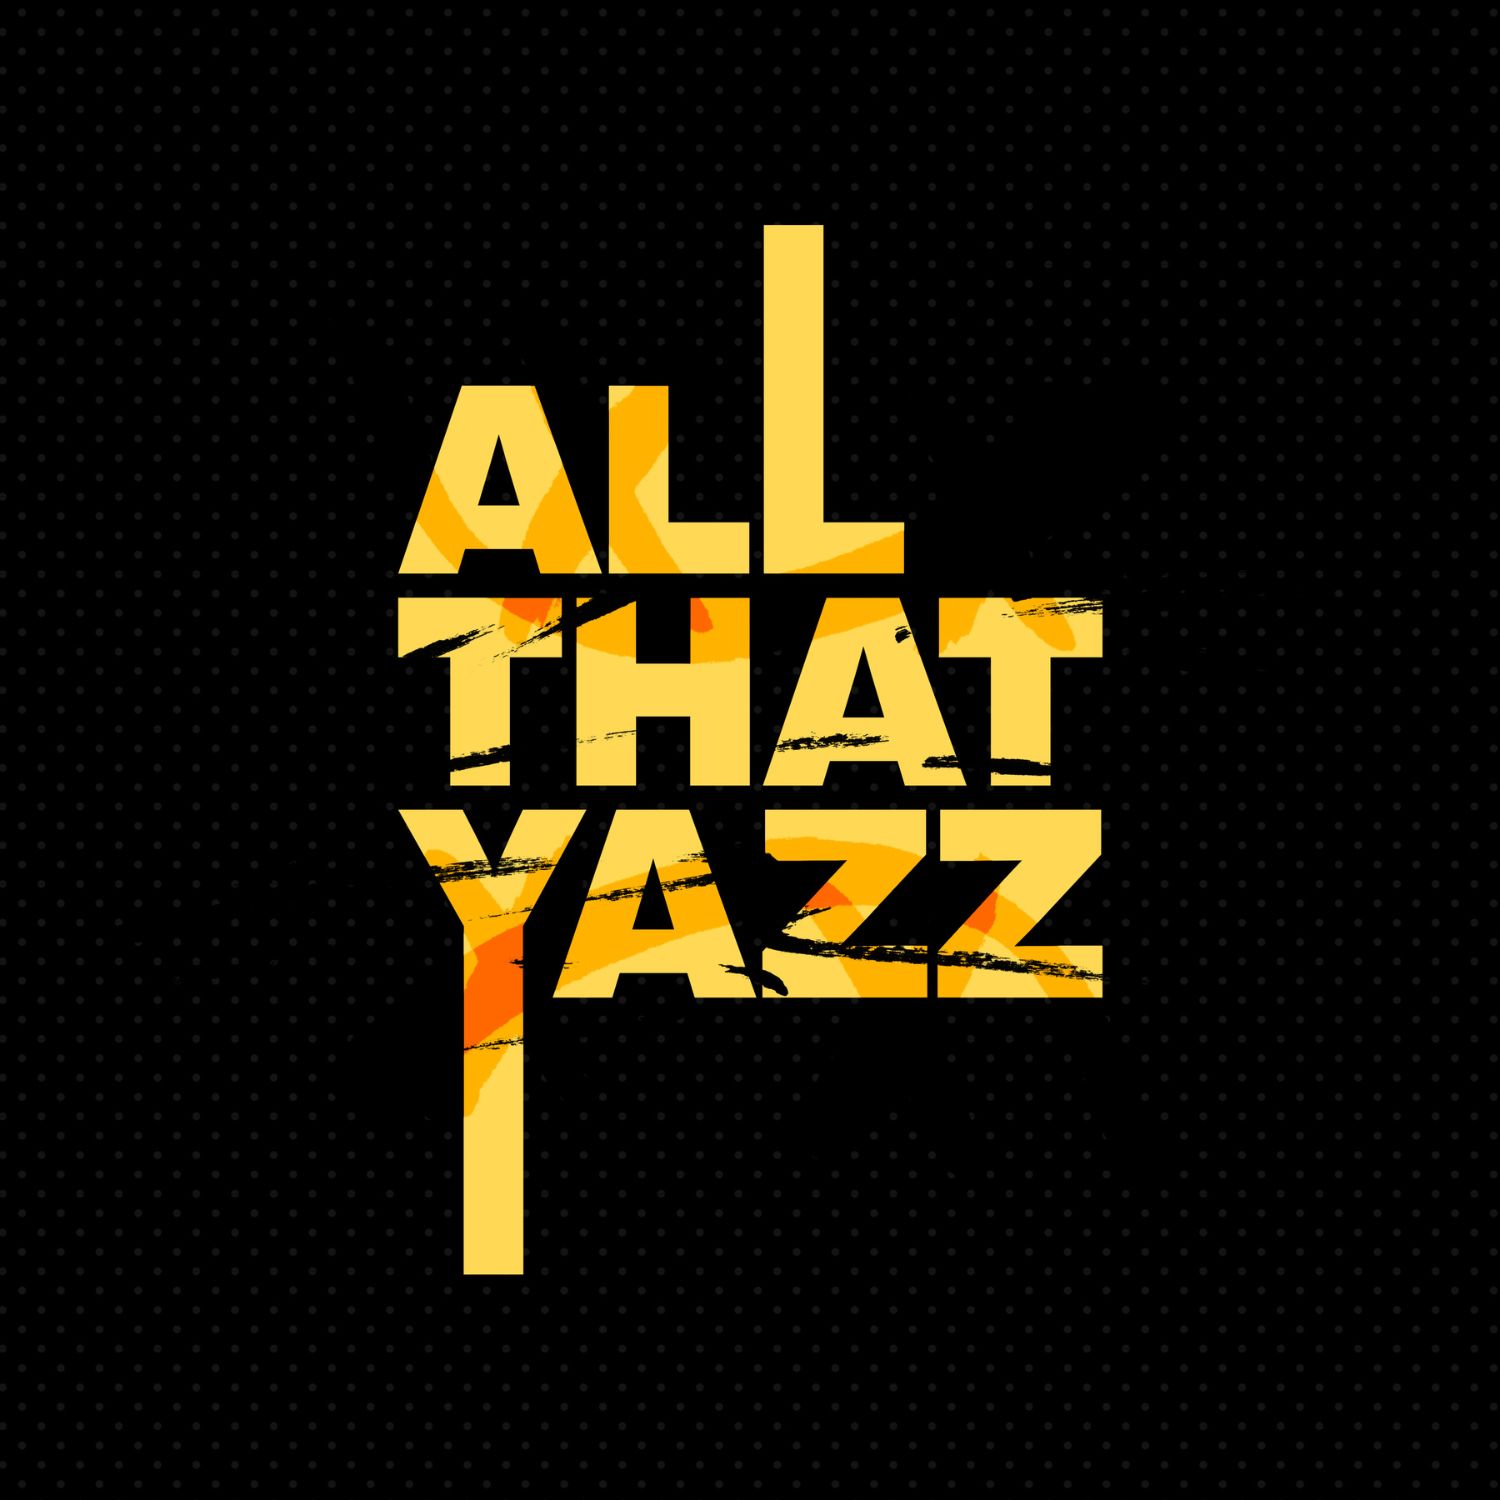 59. The All That Yazz Round-Up November 2023 Part 2 (My Debut Song & Imani Basquiat Exclusives, Showmax's Spinners, African Animation, Life On Pluto with Namakau Star, The Queenstown Kings and more